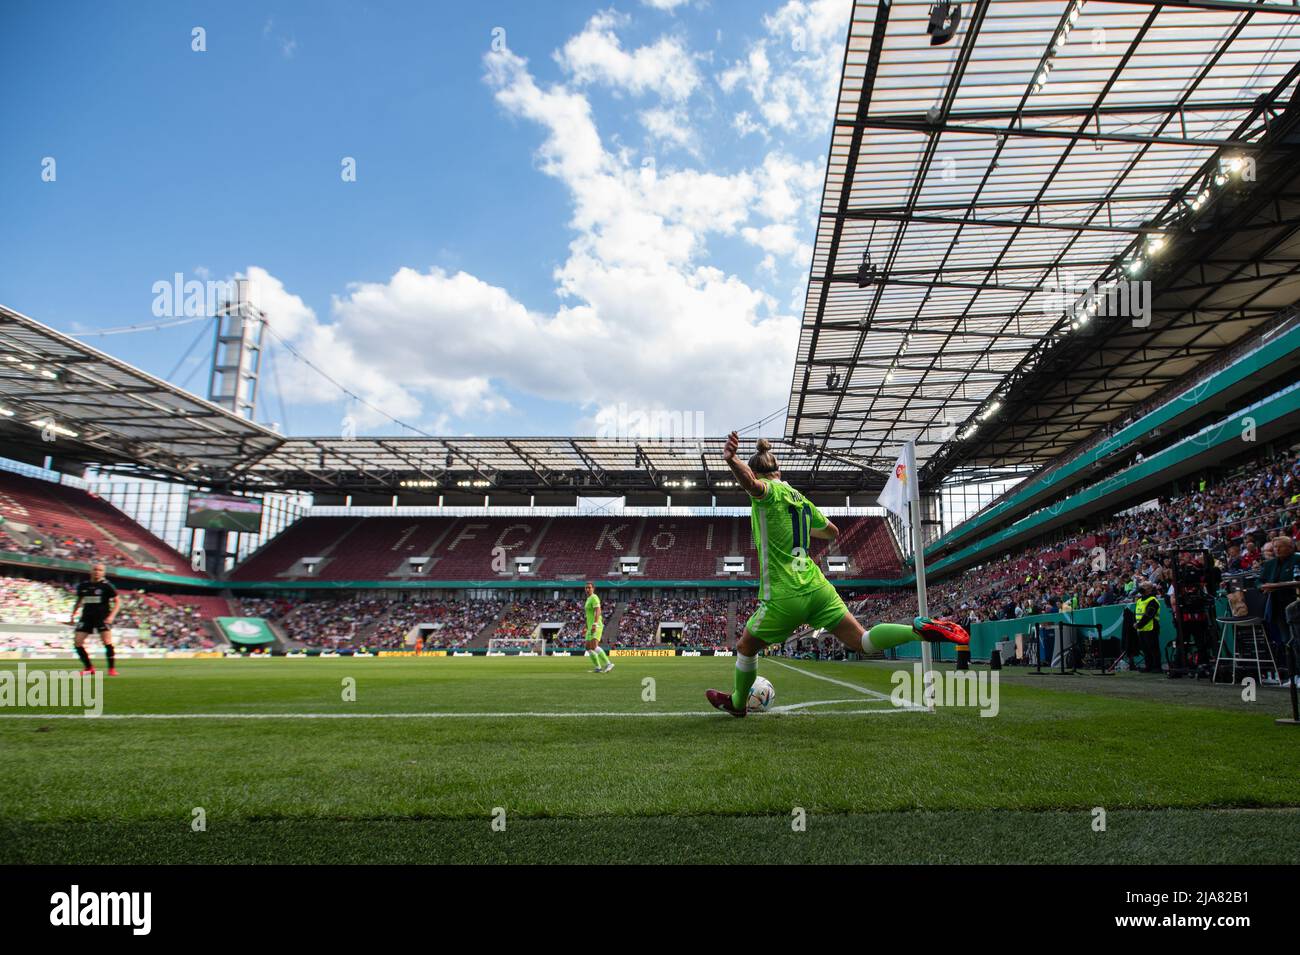 COLOGNE, GERMANY - MAY 28, 2022: DFB Pokal Finale der Frauen 2022 Stock Photo